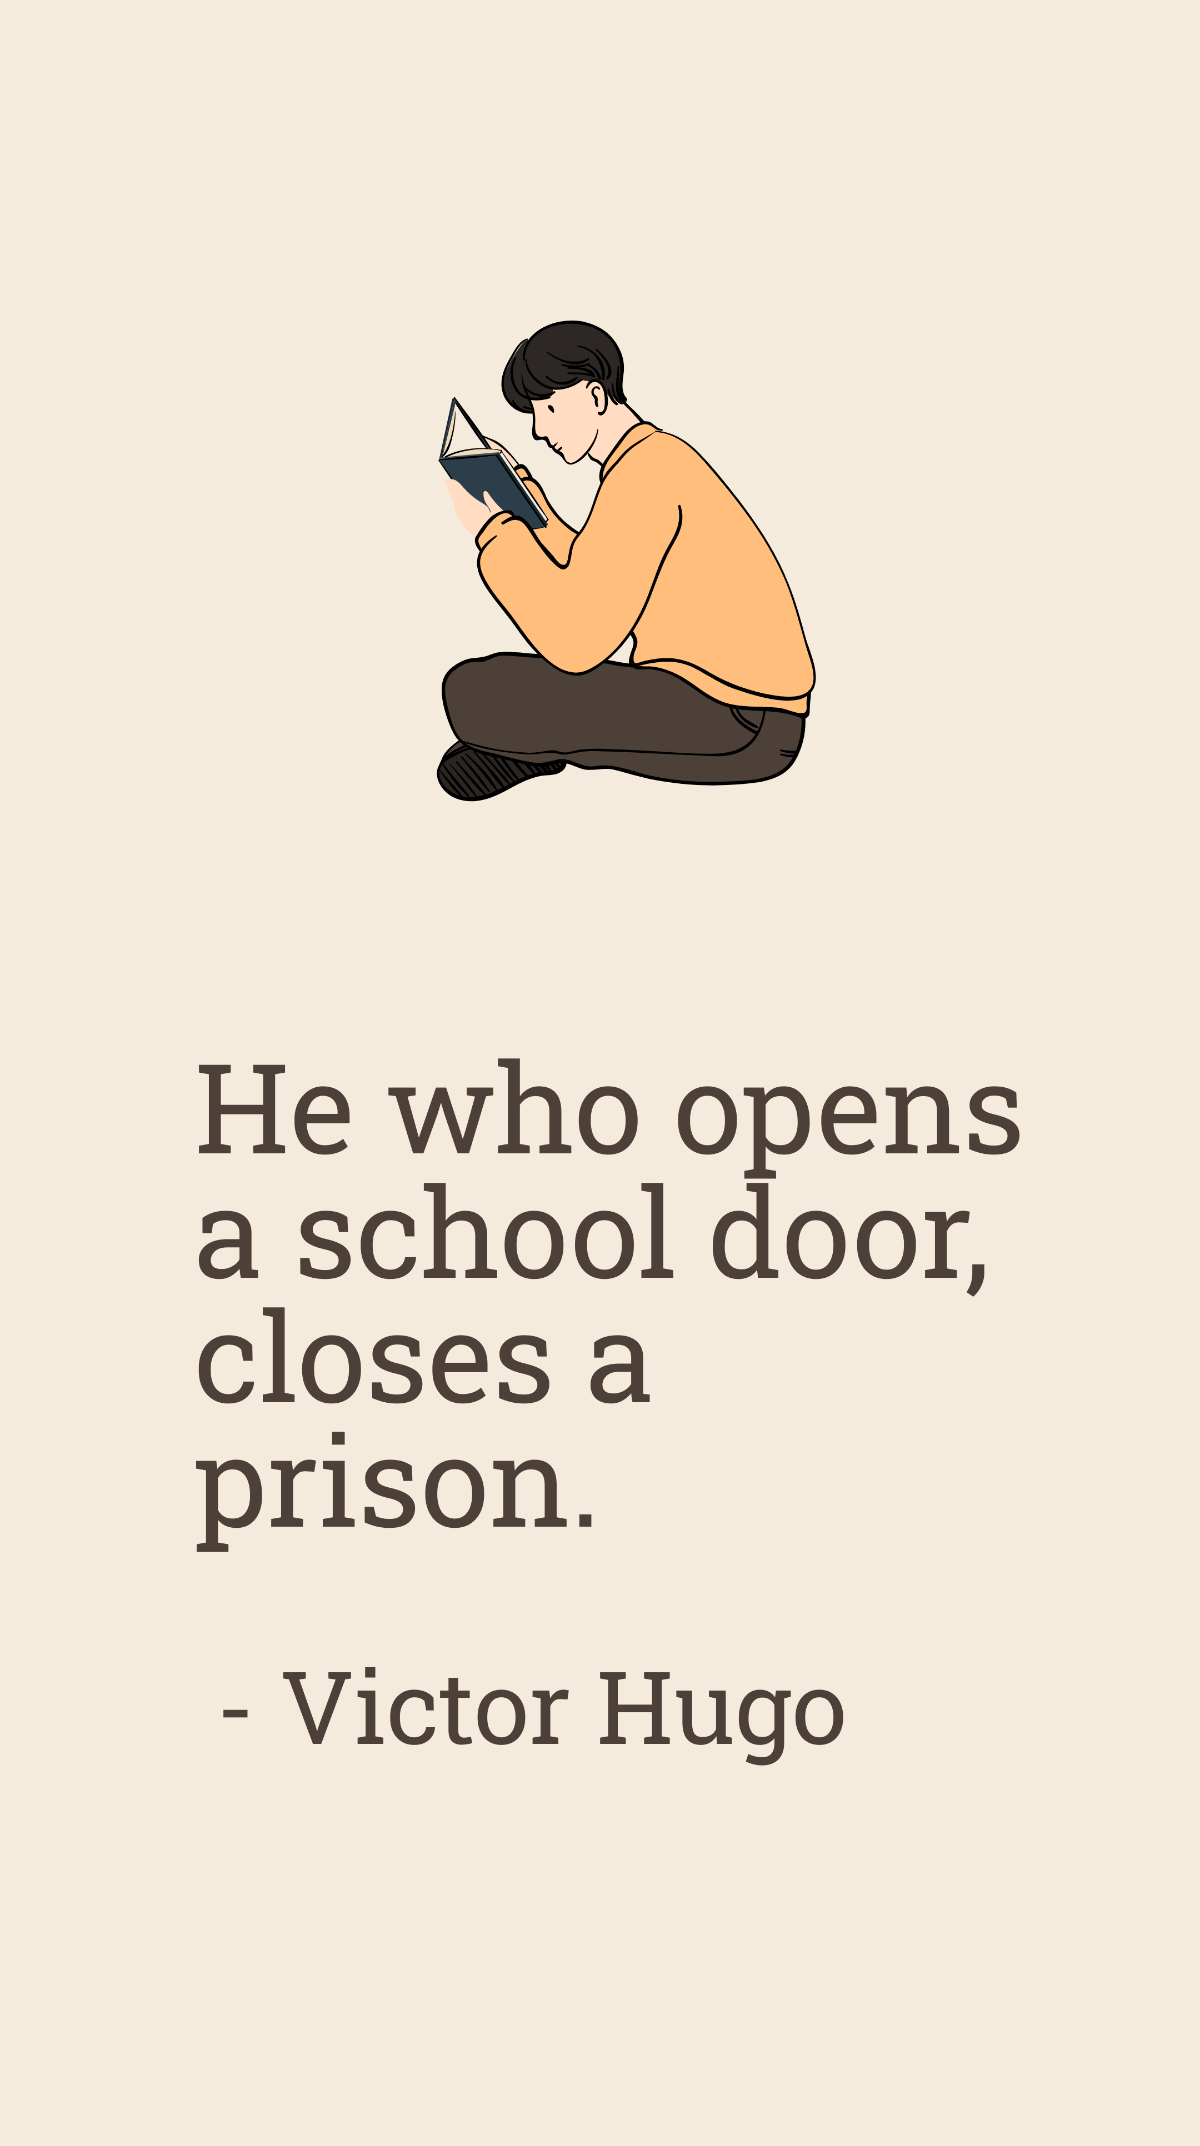 Victor Hugo - He who opens a school door, closes a prison. Template